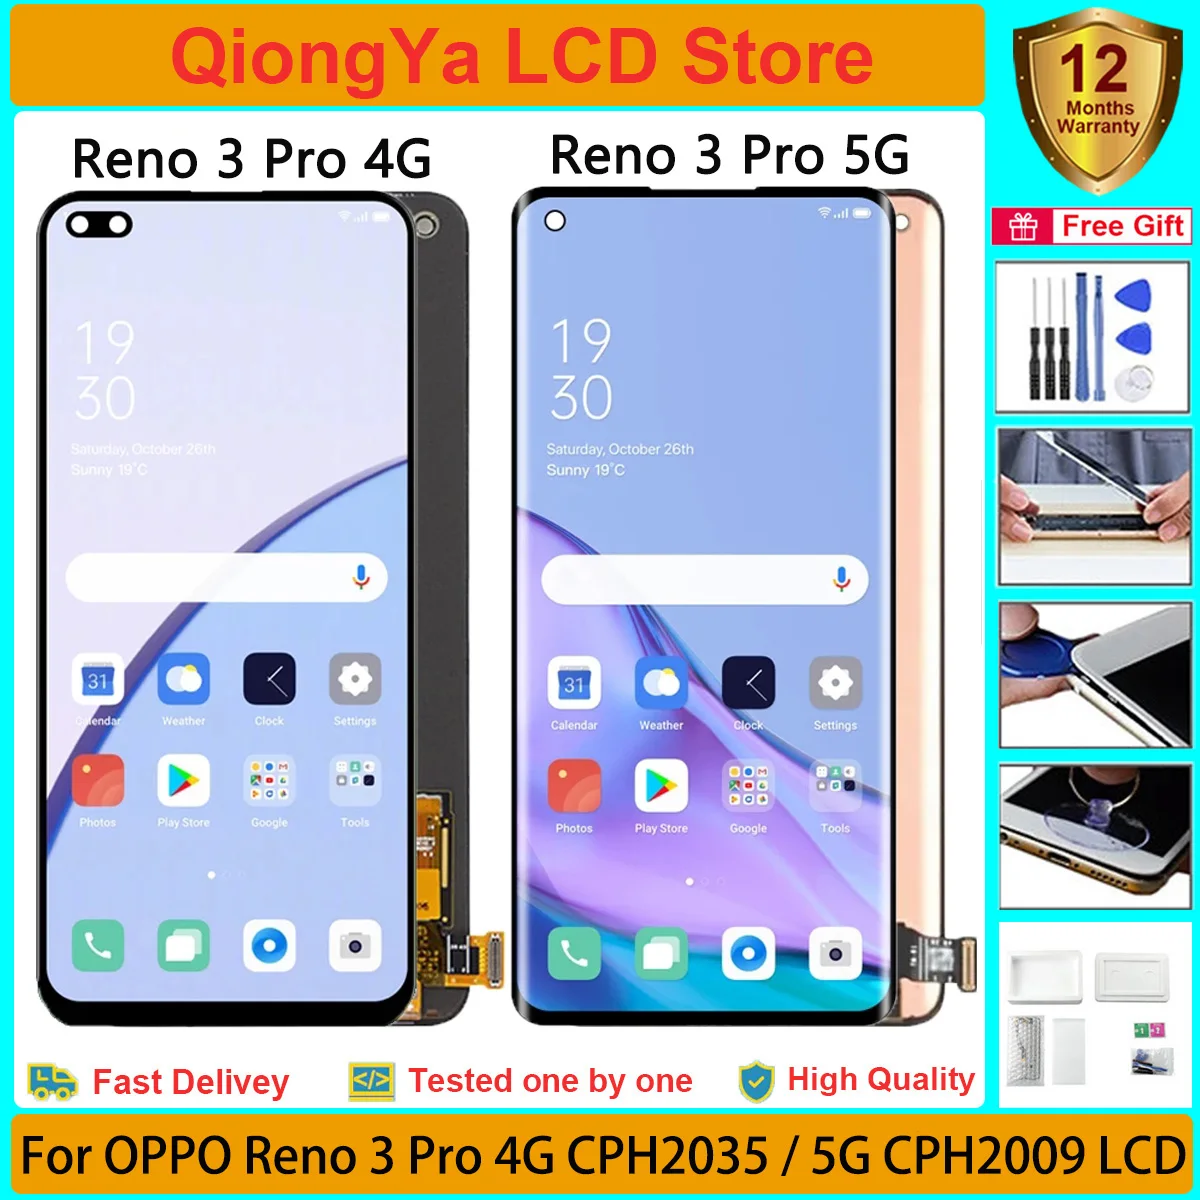 Enlarge New Original reno3 pro Display For OPPO Reno 3 Pro 4G CPH2035 CPH2036 Reno 3 Pro 5G CPH2009 LCD Touch Screen Digitizer Assembly